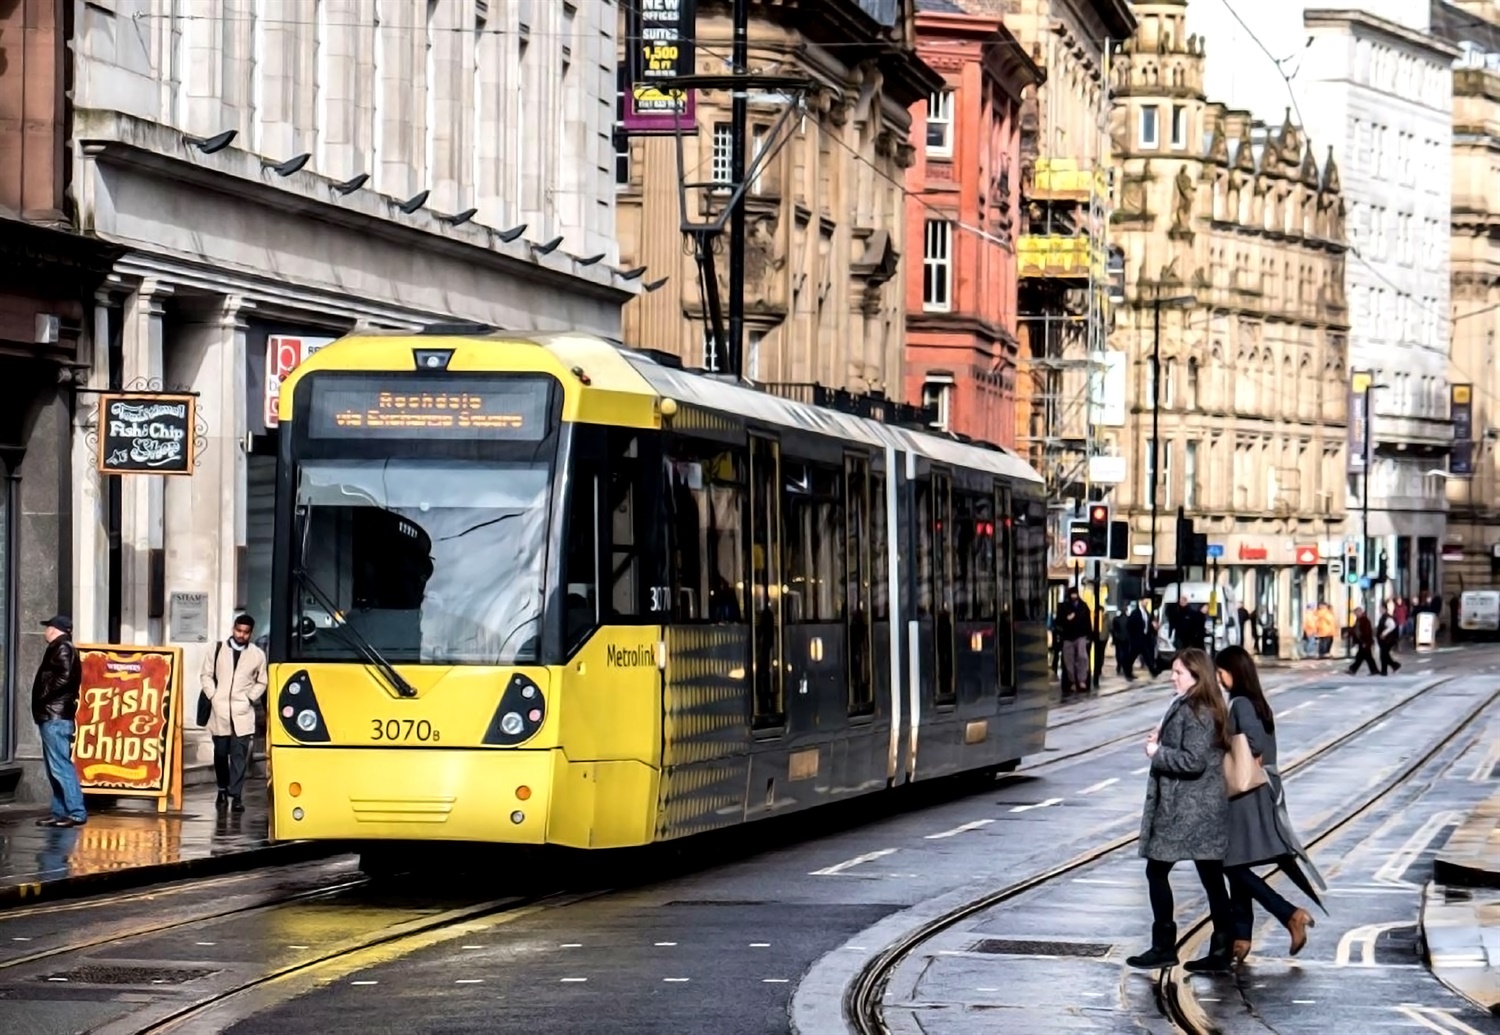 Tram passengers demand better value for money from services